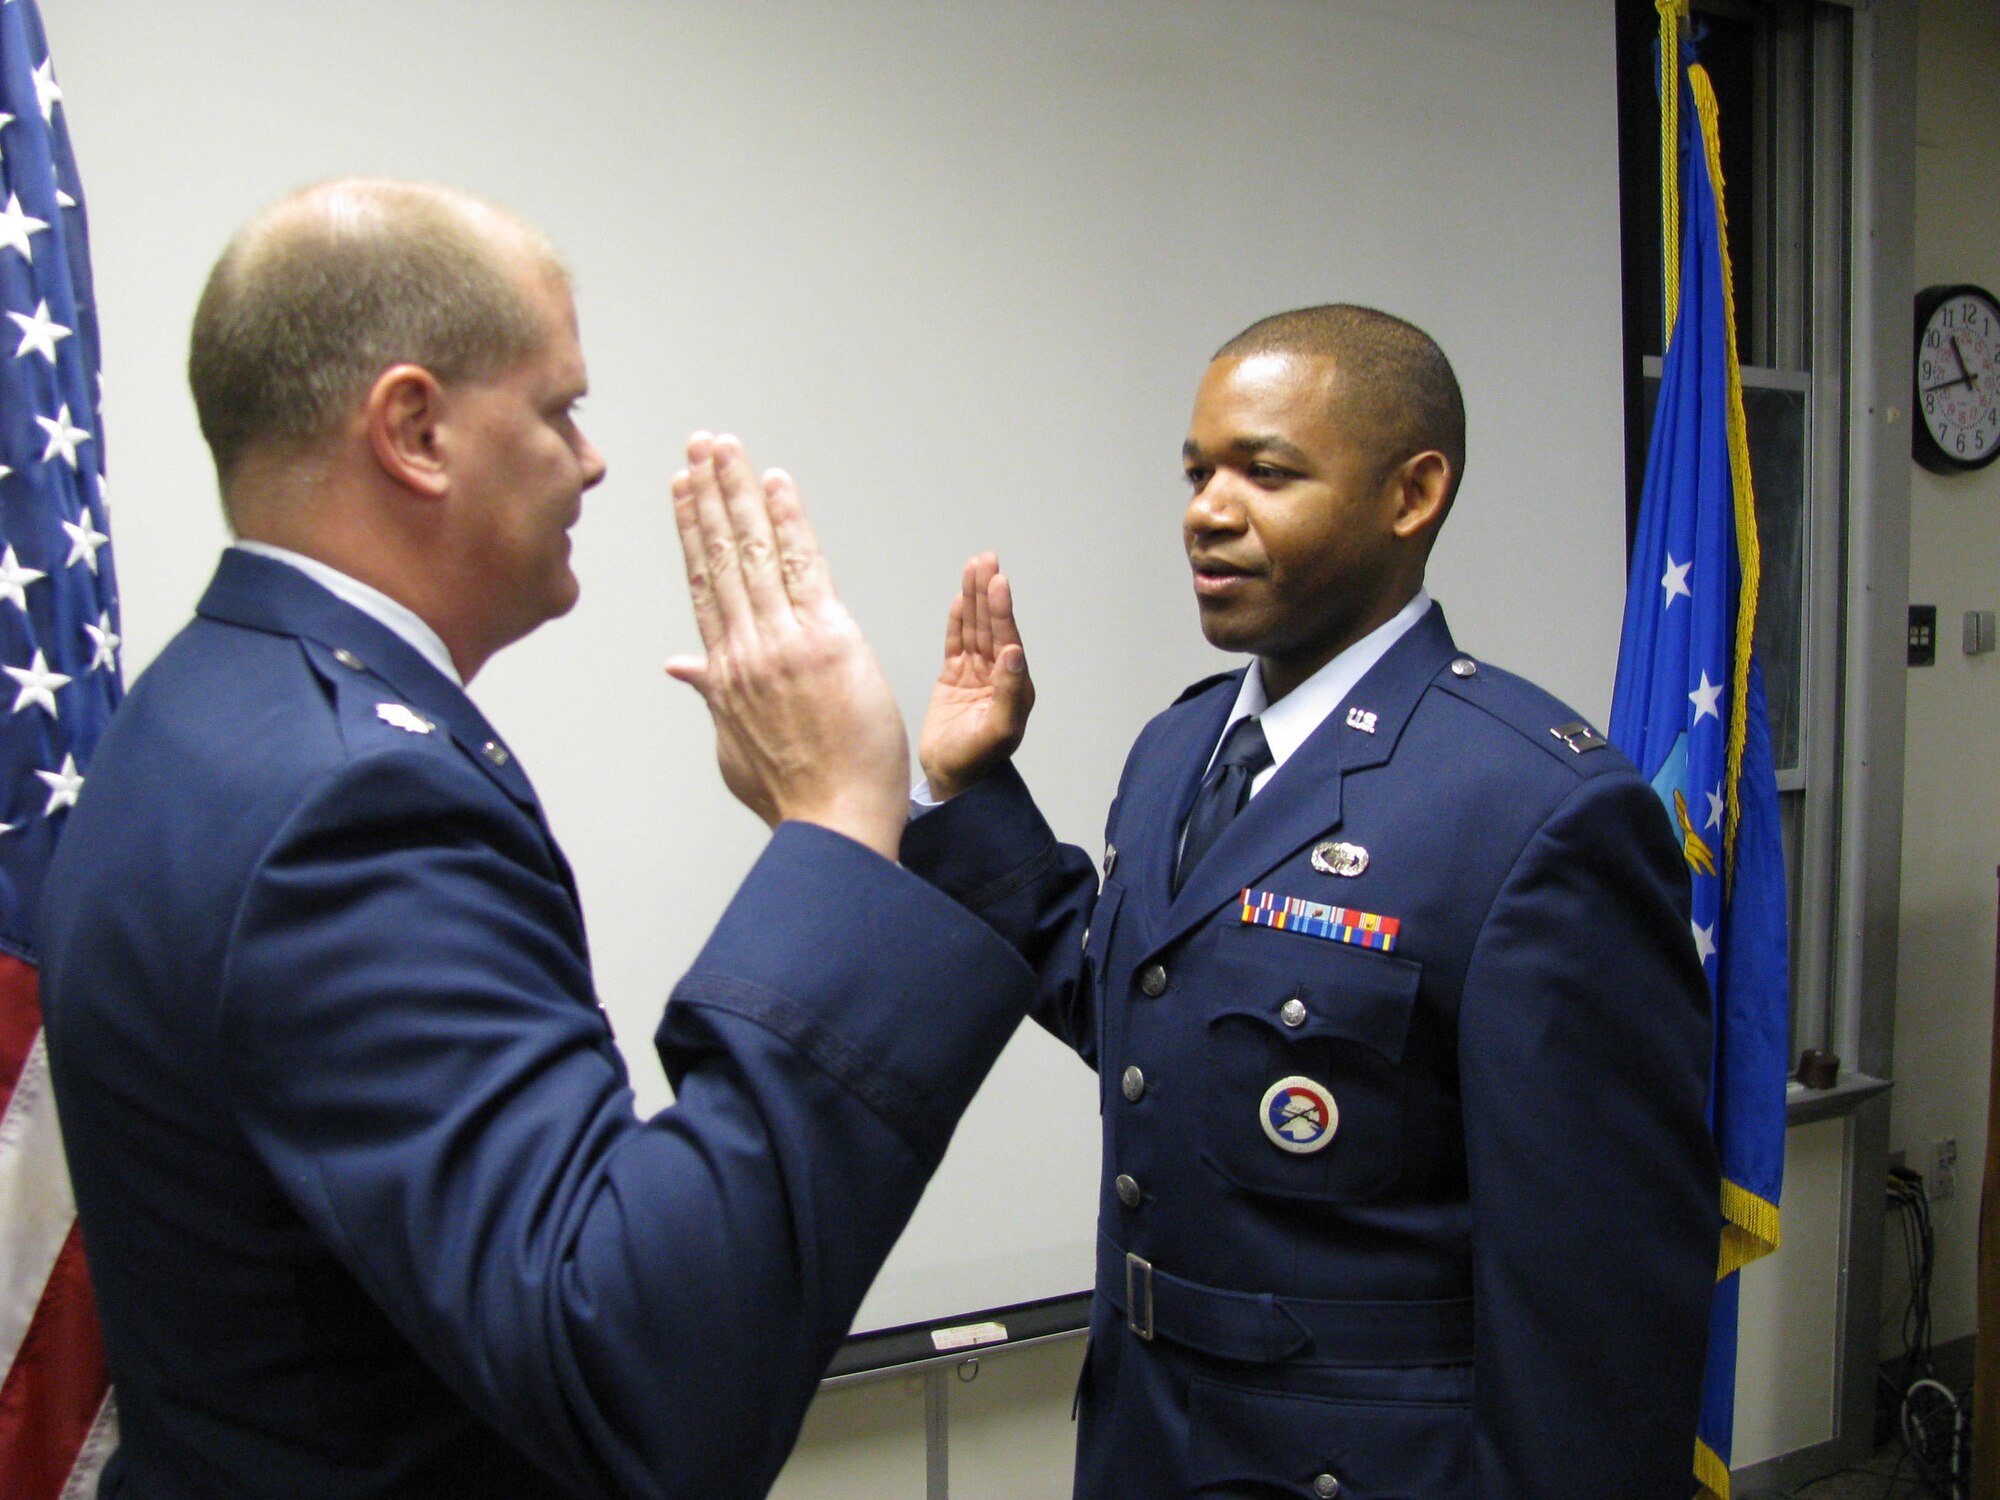 Captain Jonathan Pellum, Heritage Coat program manager, 648th Aeronautical Systems Squadron, recites the oath of office in a ceremony officiated by Lt. Col. Gary Salmans here. The Captain used his promotion ceremony to showcase the proposed Air Force Heritage Service Dress Coat. (U.S. Air Force Photo courtesy of the 648th AESS)